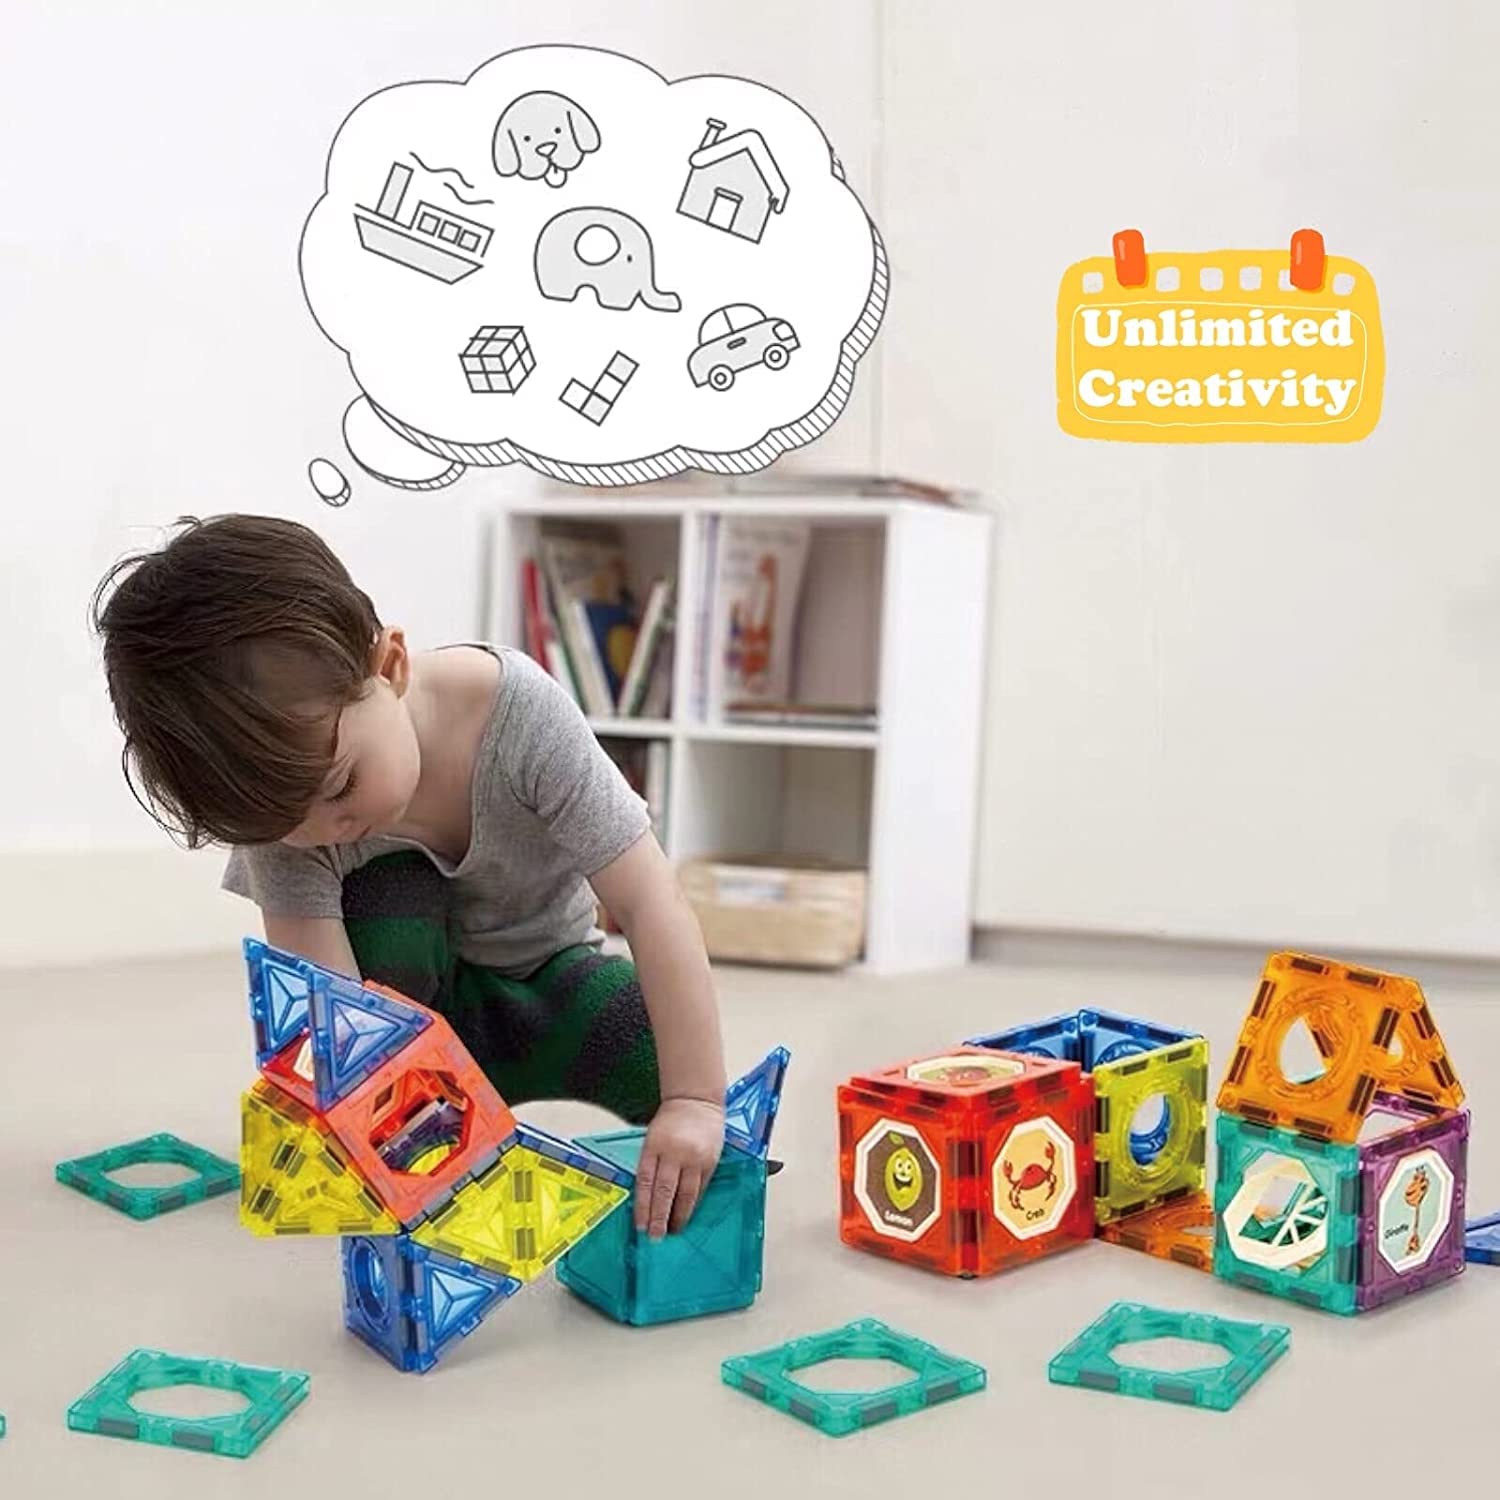 Light Magnetic Tiles 110 pcs- Building Blocks for Kids 3D STEAM Educational Toys Magnetic Marble Run for Kids Age 3 +Year  Creative Gift